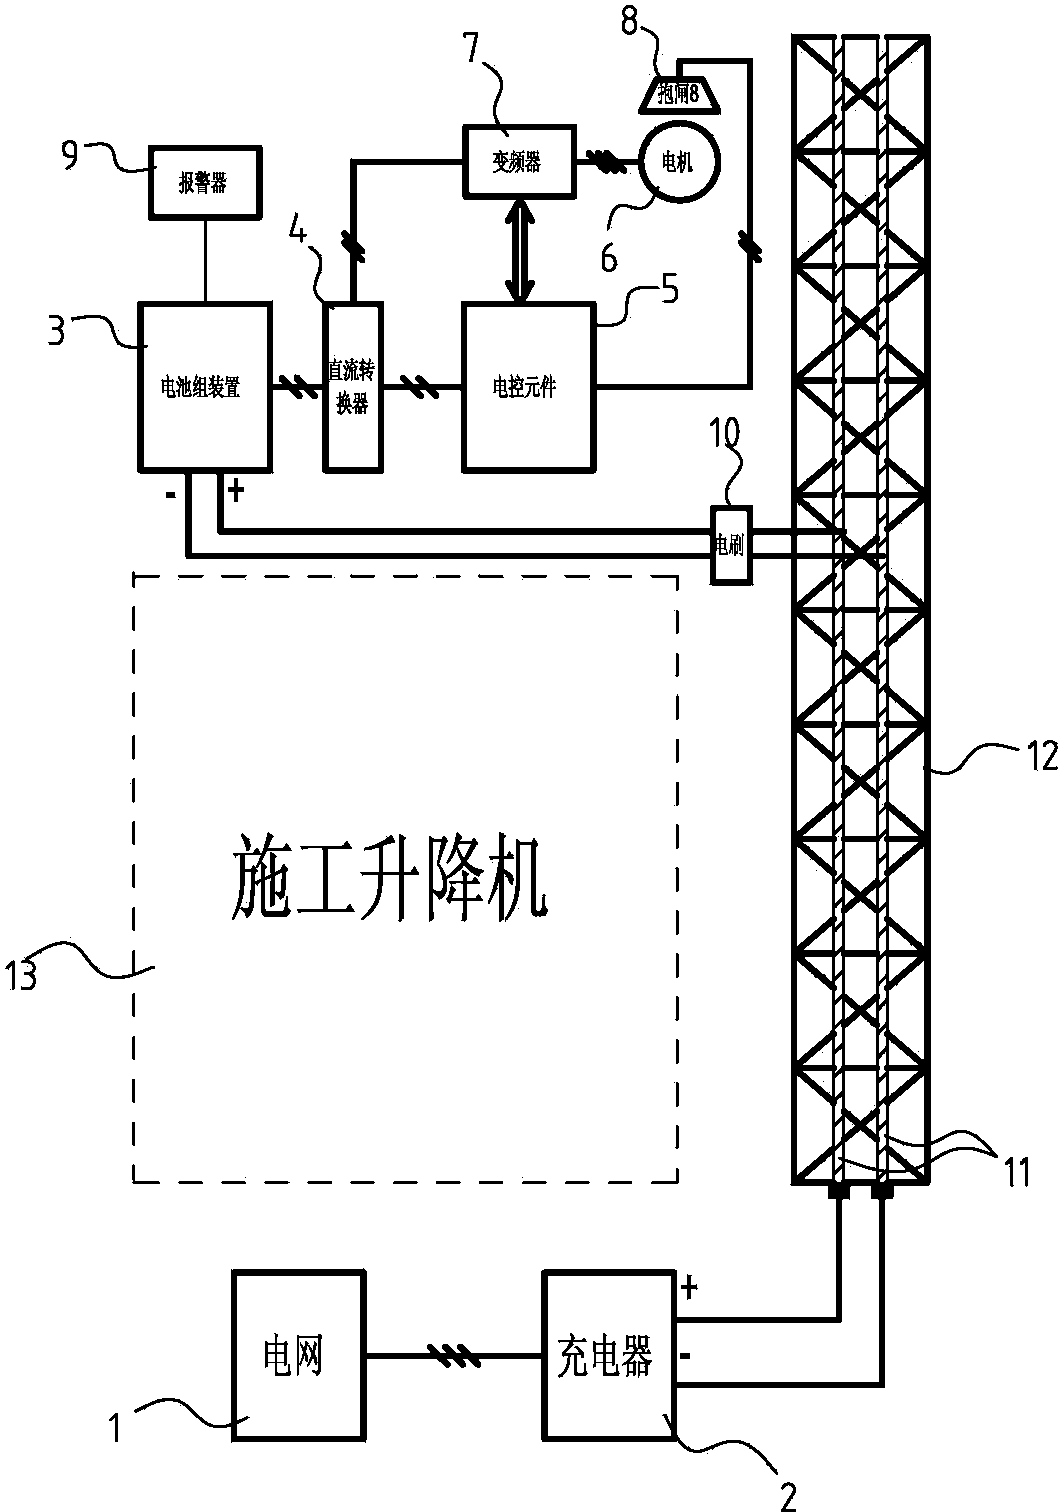 Trolley conductor energy storage type construction elevator